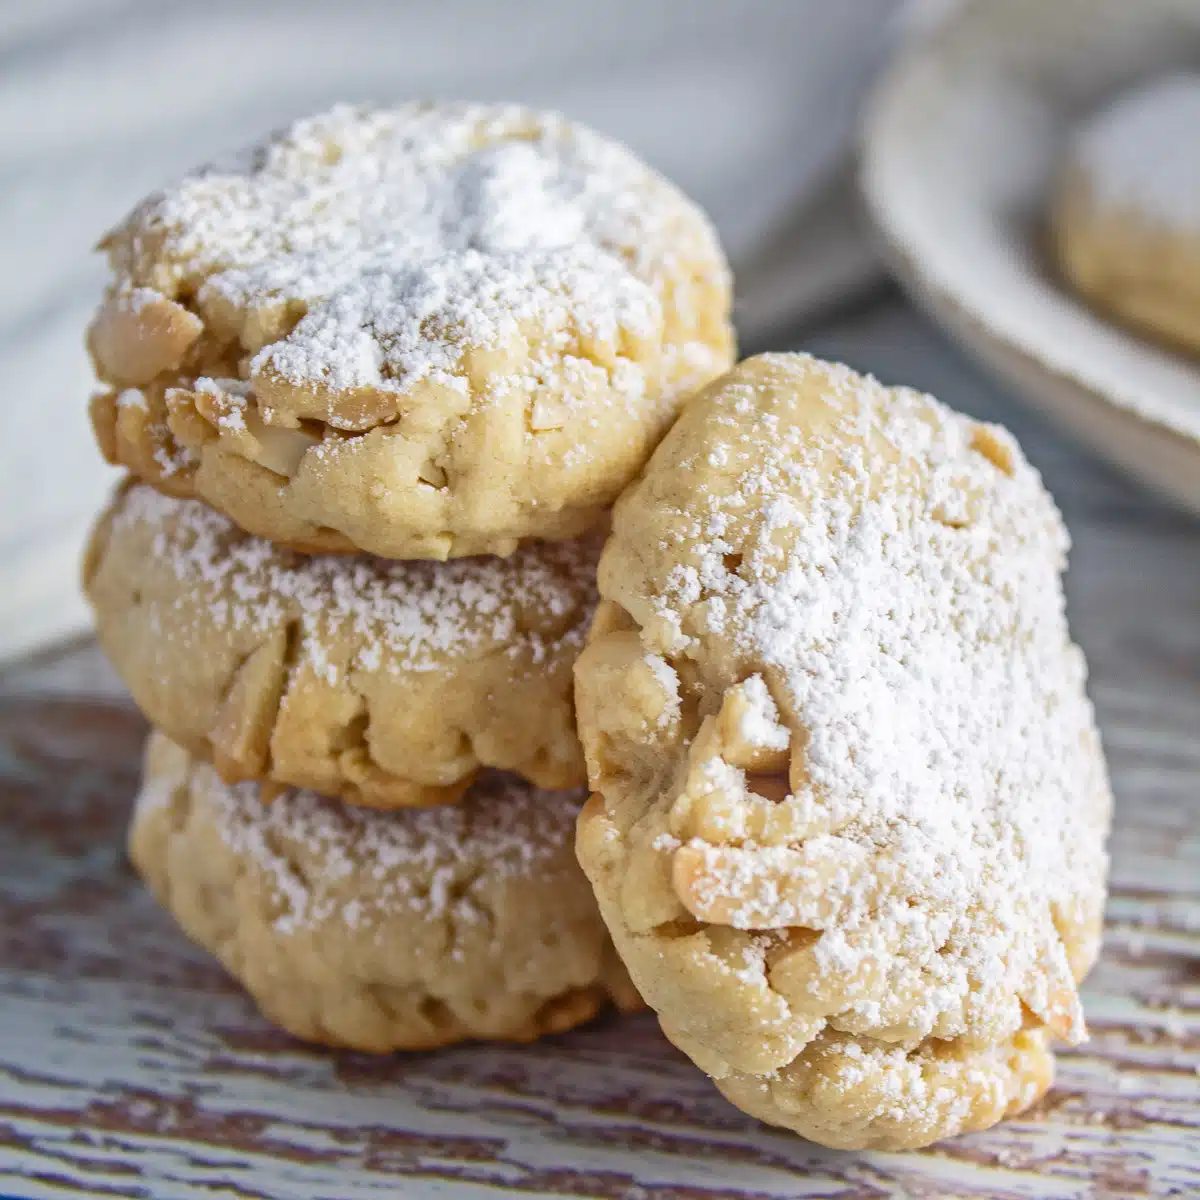 Best Greek almond cookies (kourabiedes) recipe with the tasty, crumbly textured cookies stacked three cookies high and a fourth cookie leaning against them.